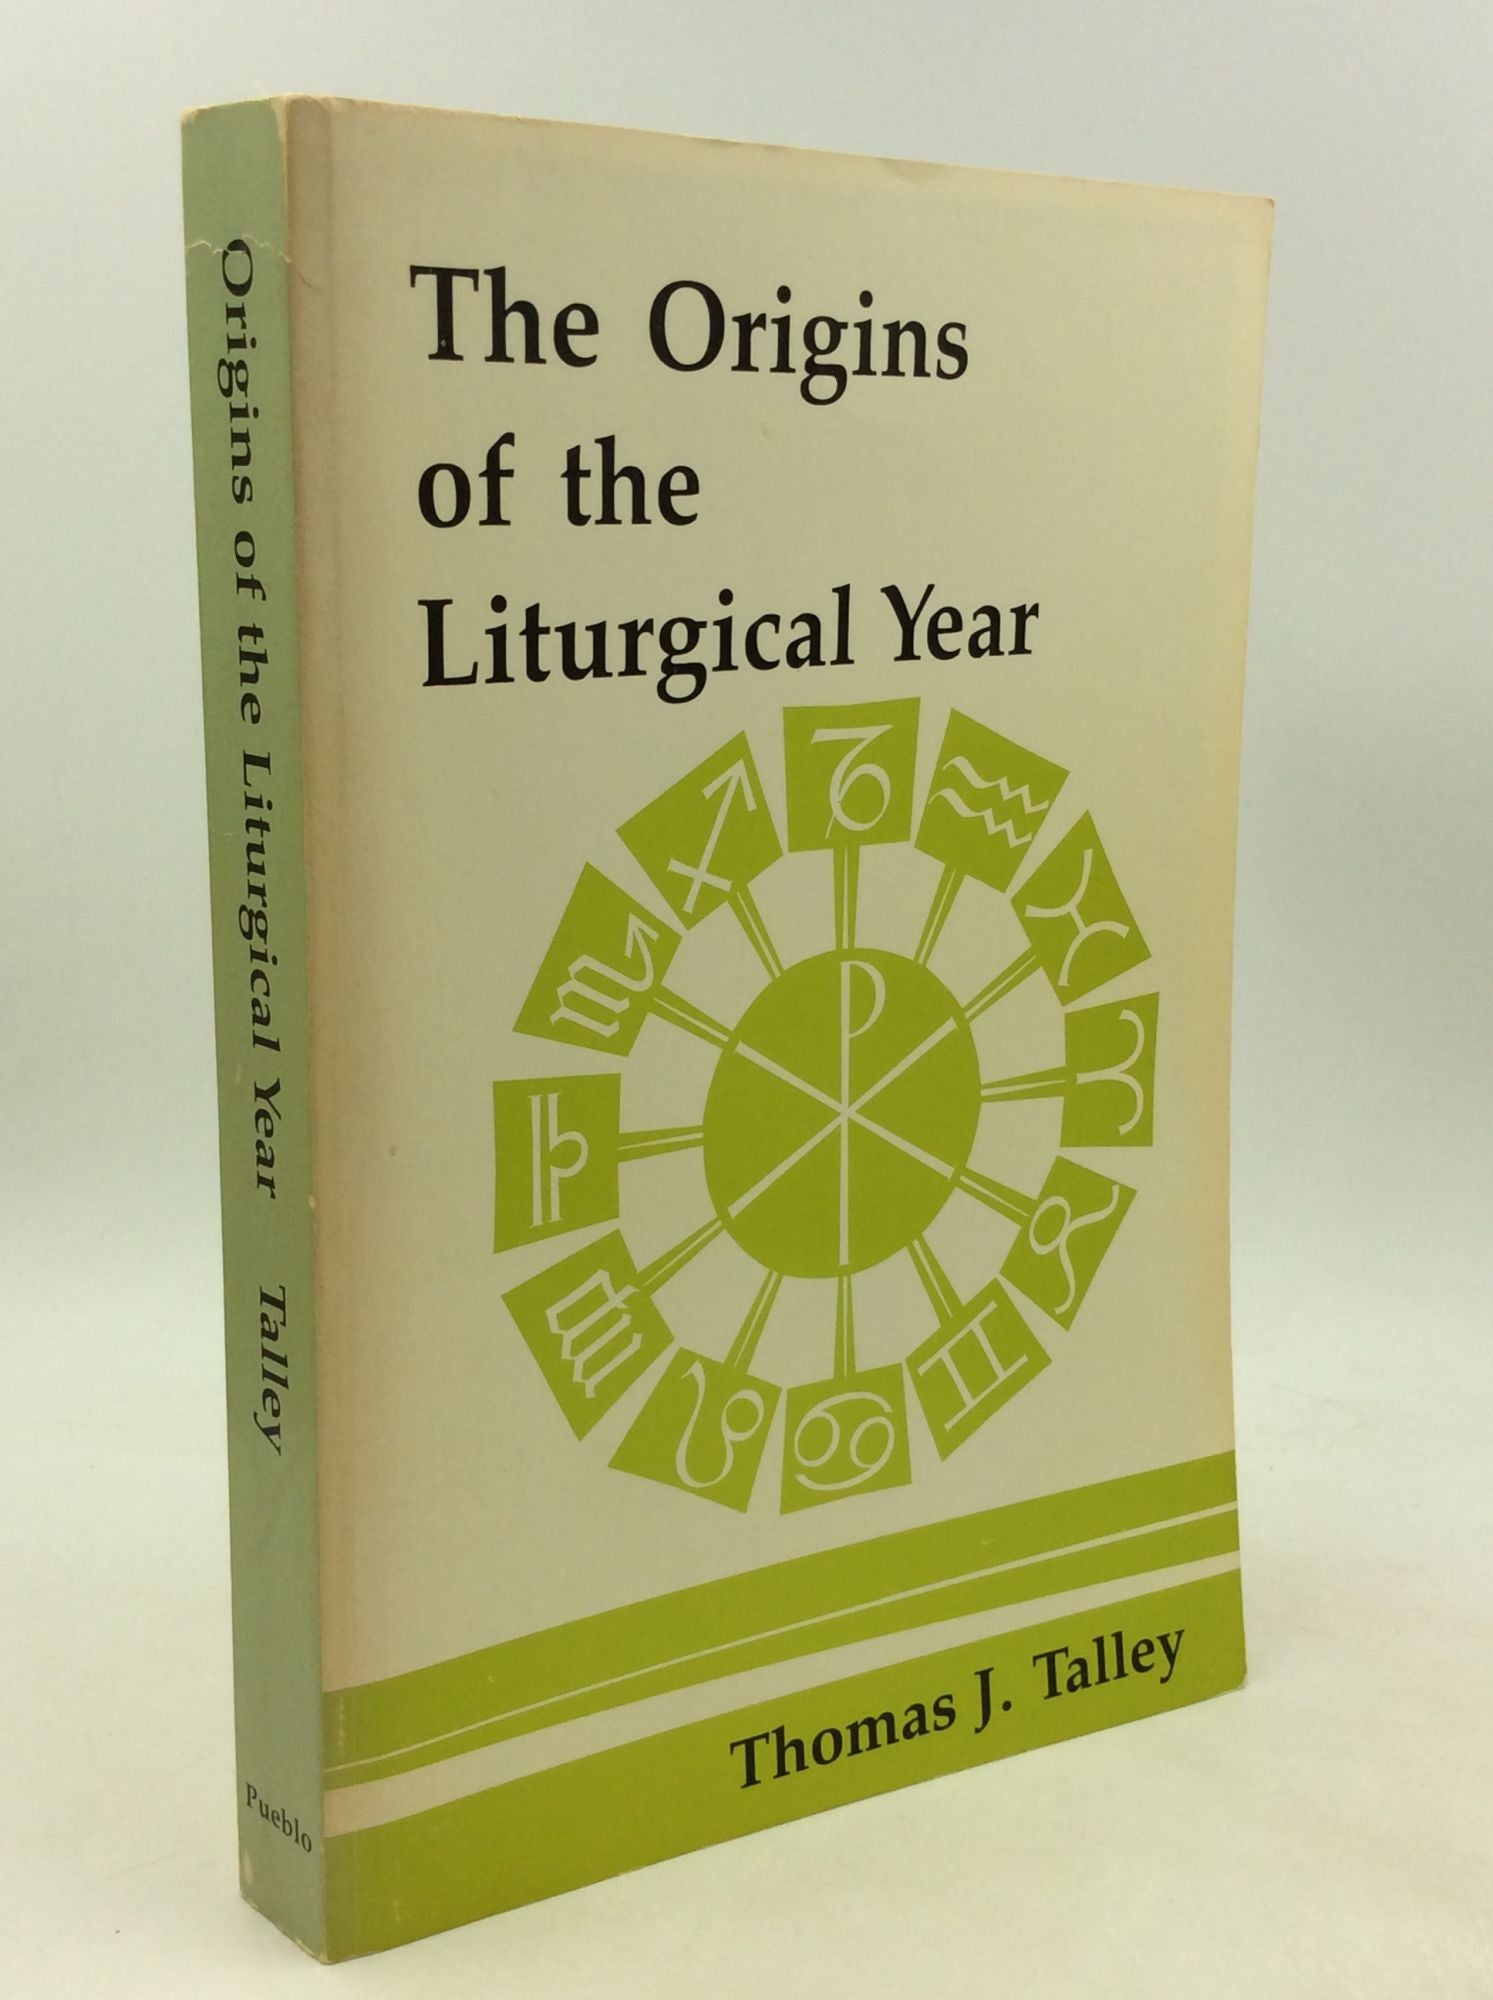 Thomas J. Talley - The Origins of the Liturgical Year